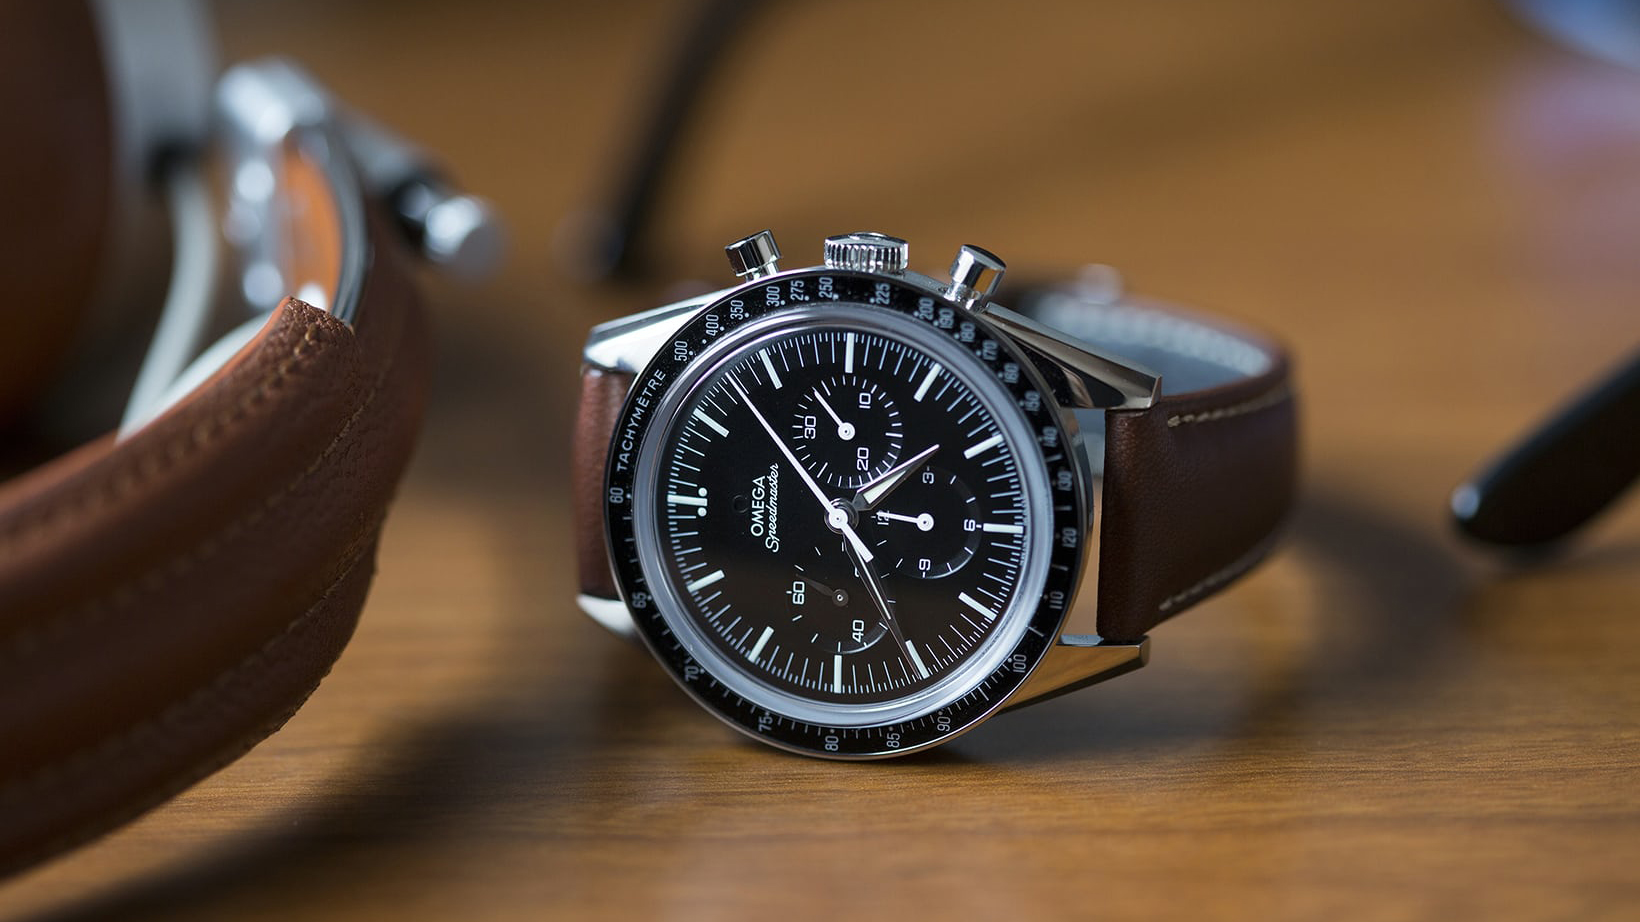 hodinkee first omega in space